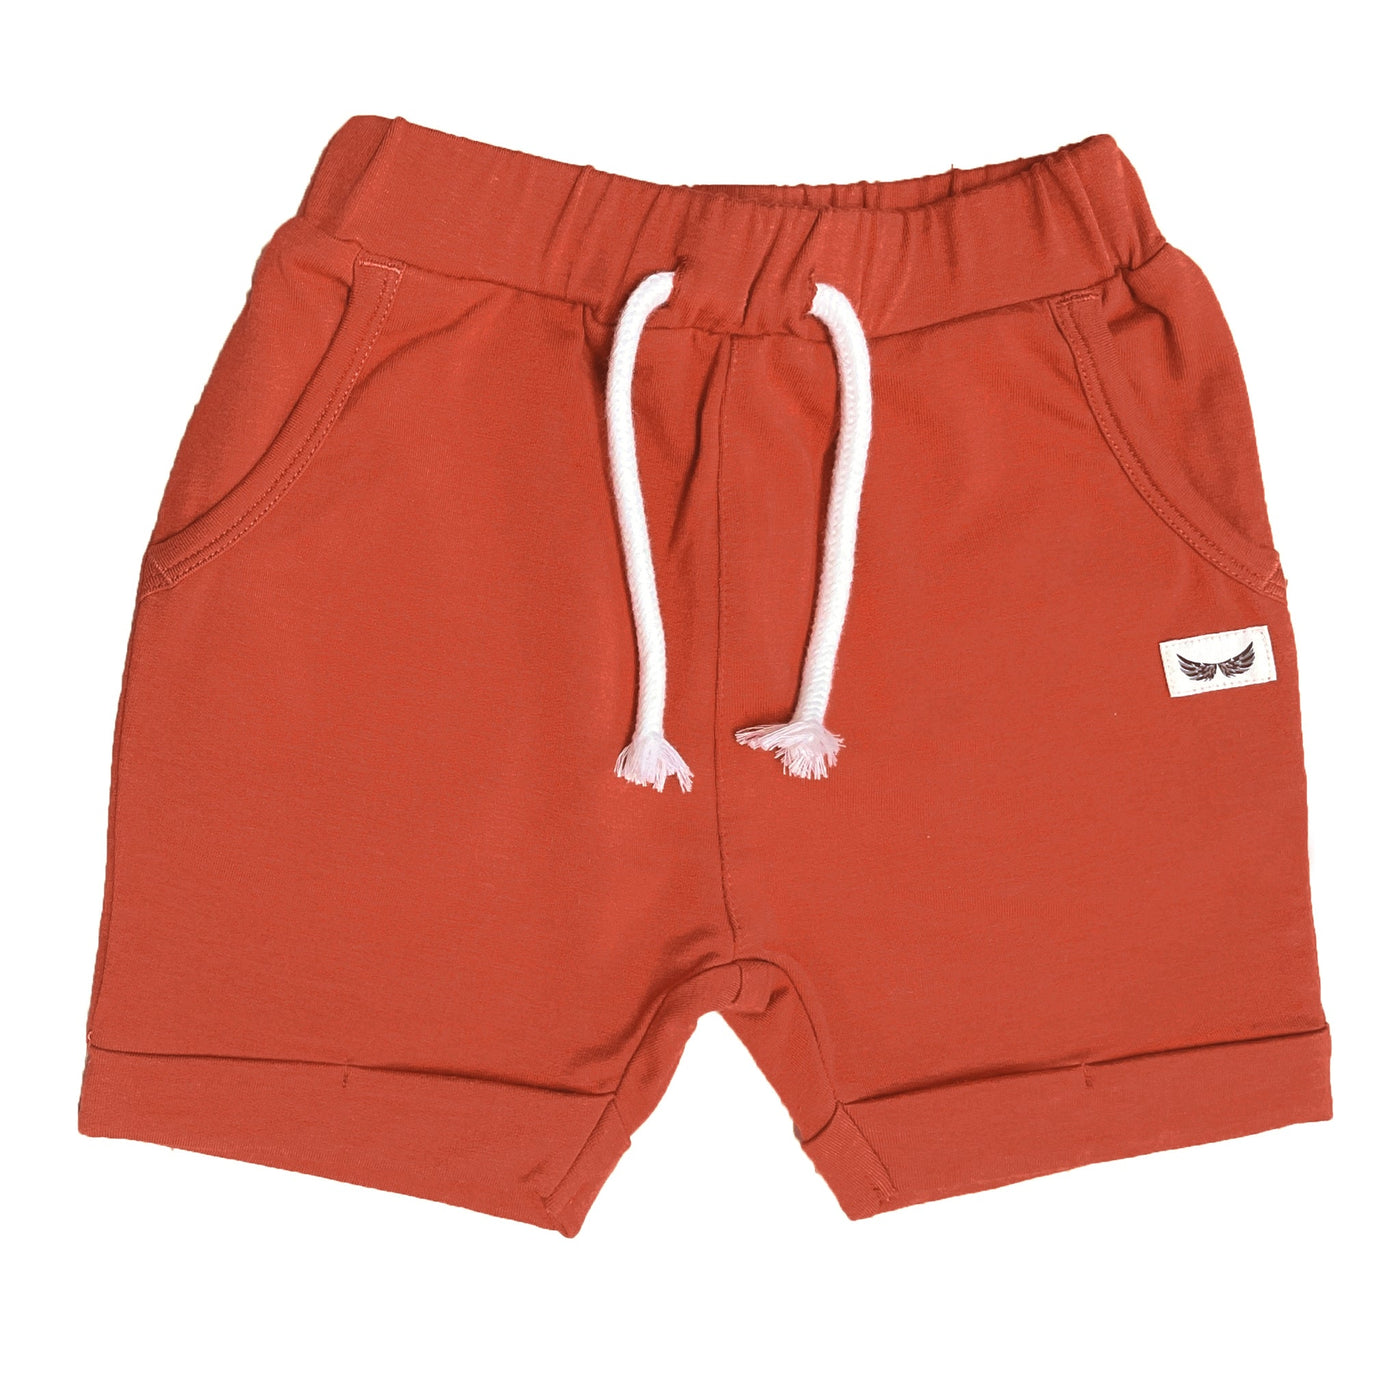 Rust Kids Harem Shorts with Pockets | 65% Bamboo/28% cotton/7% Spandex French Terry (18M-8Y) - Free Birdees